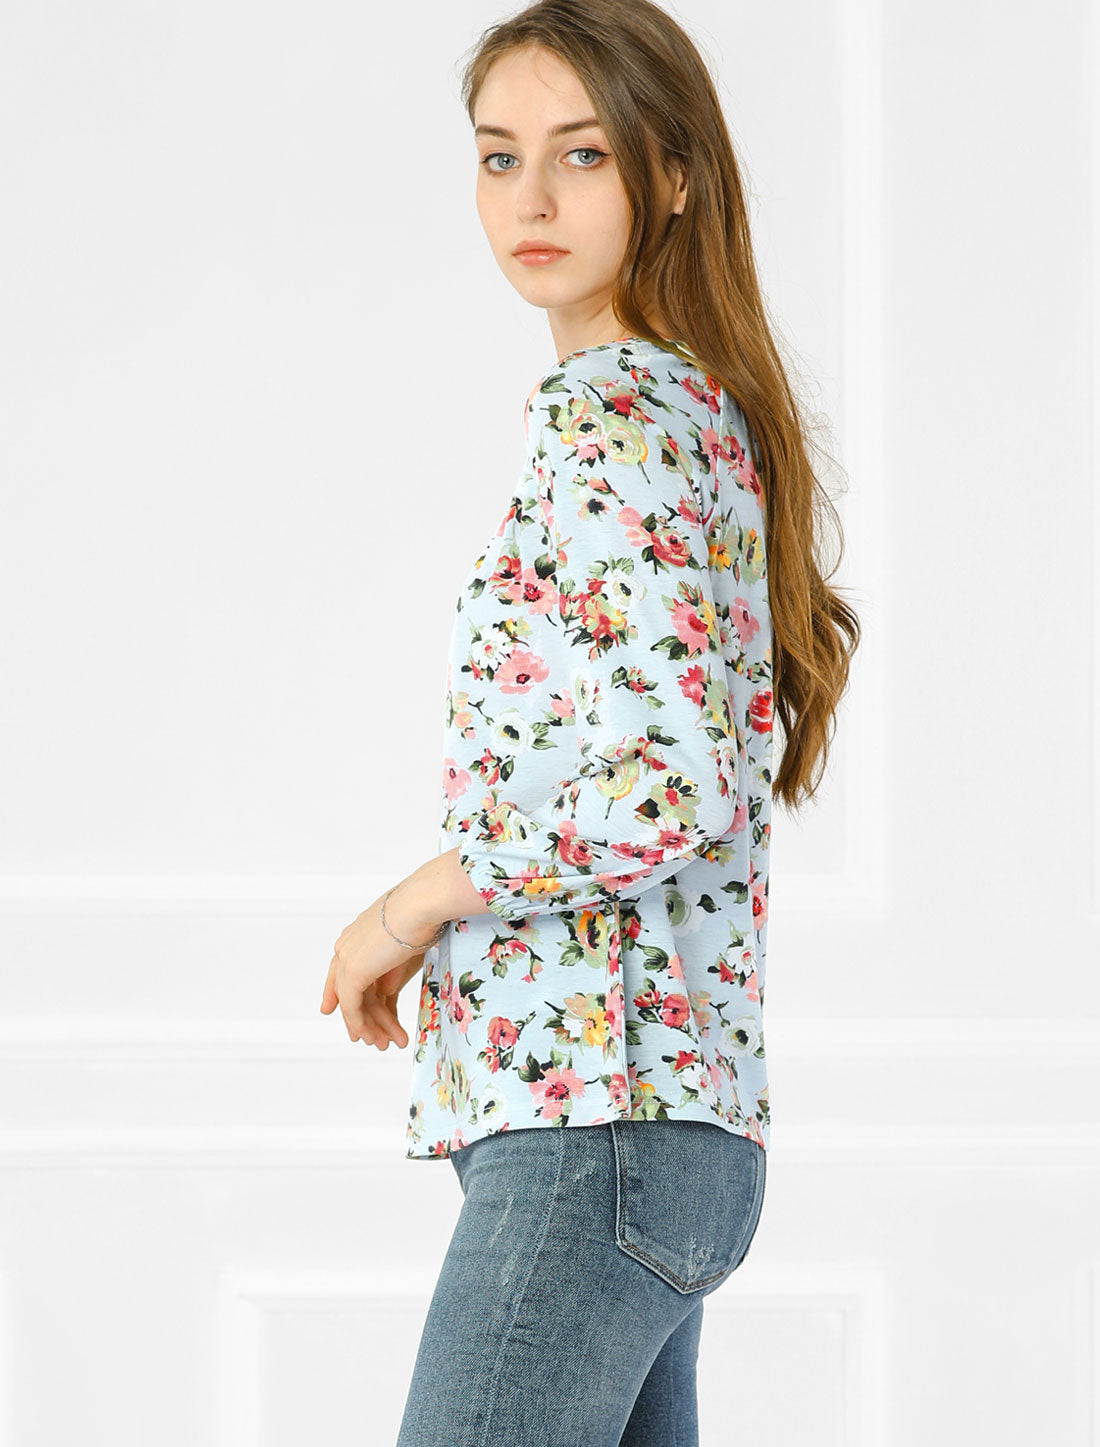 Allegra K Casual V Neck Shirt Fall Floral Blouse Top